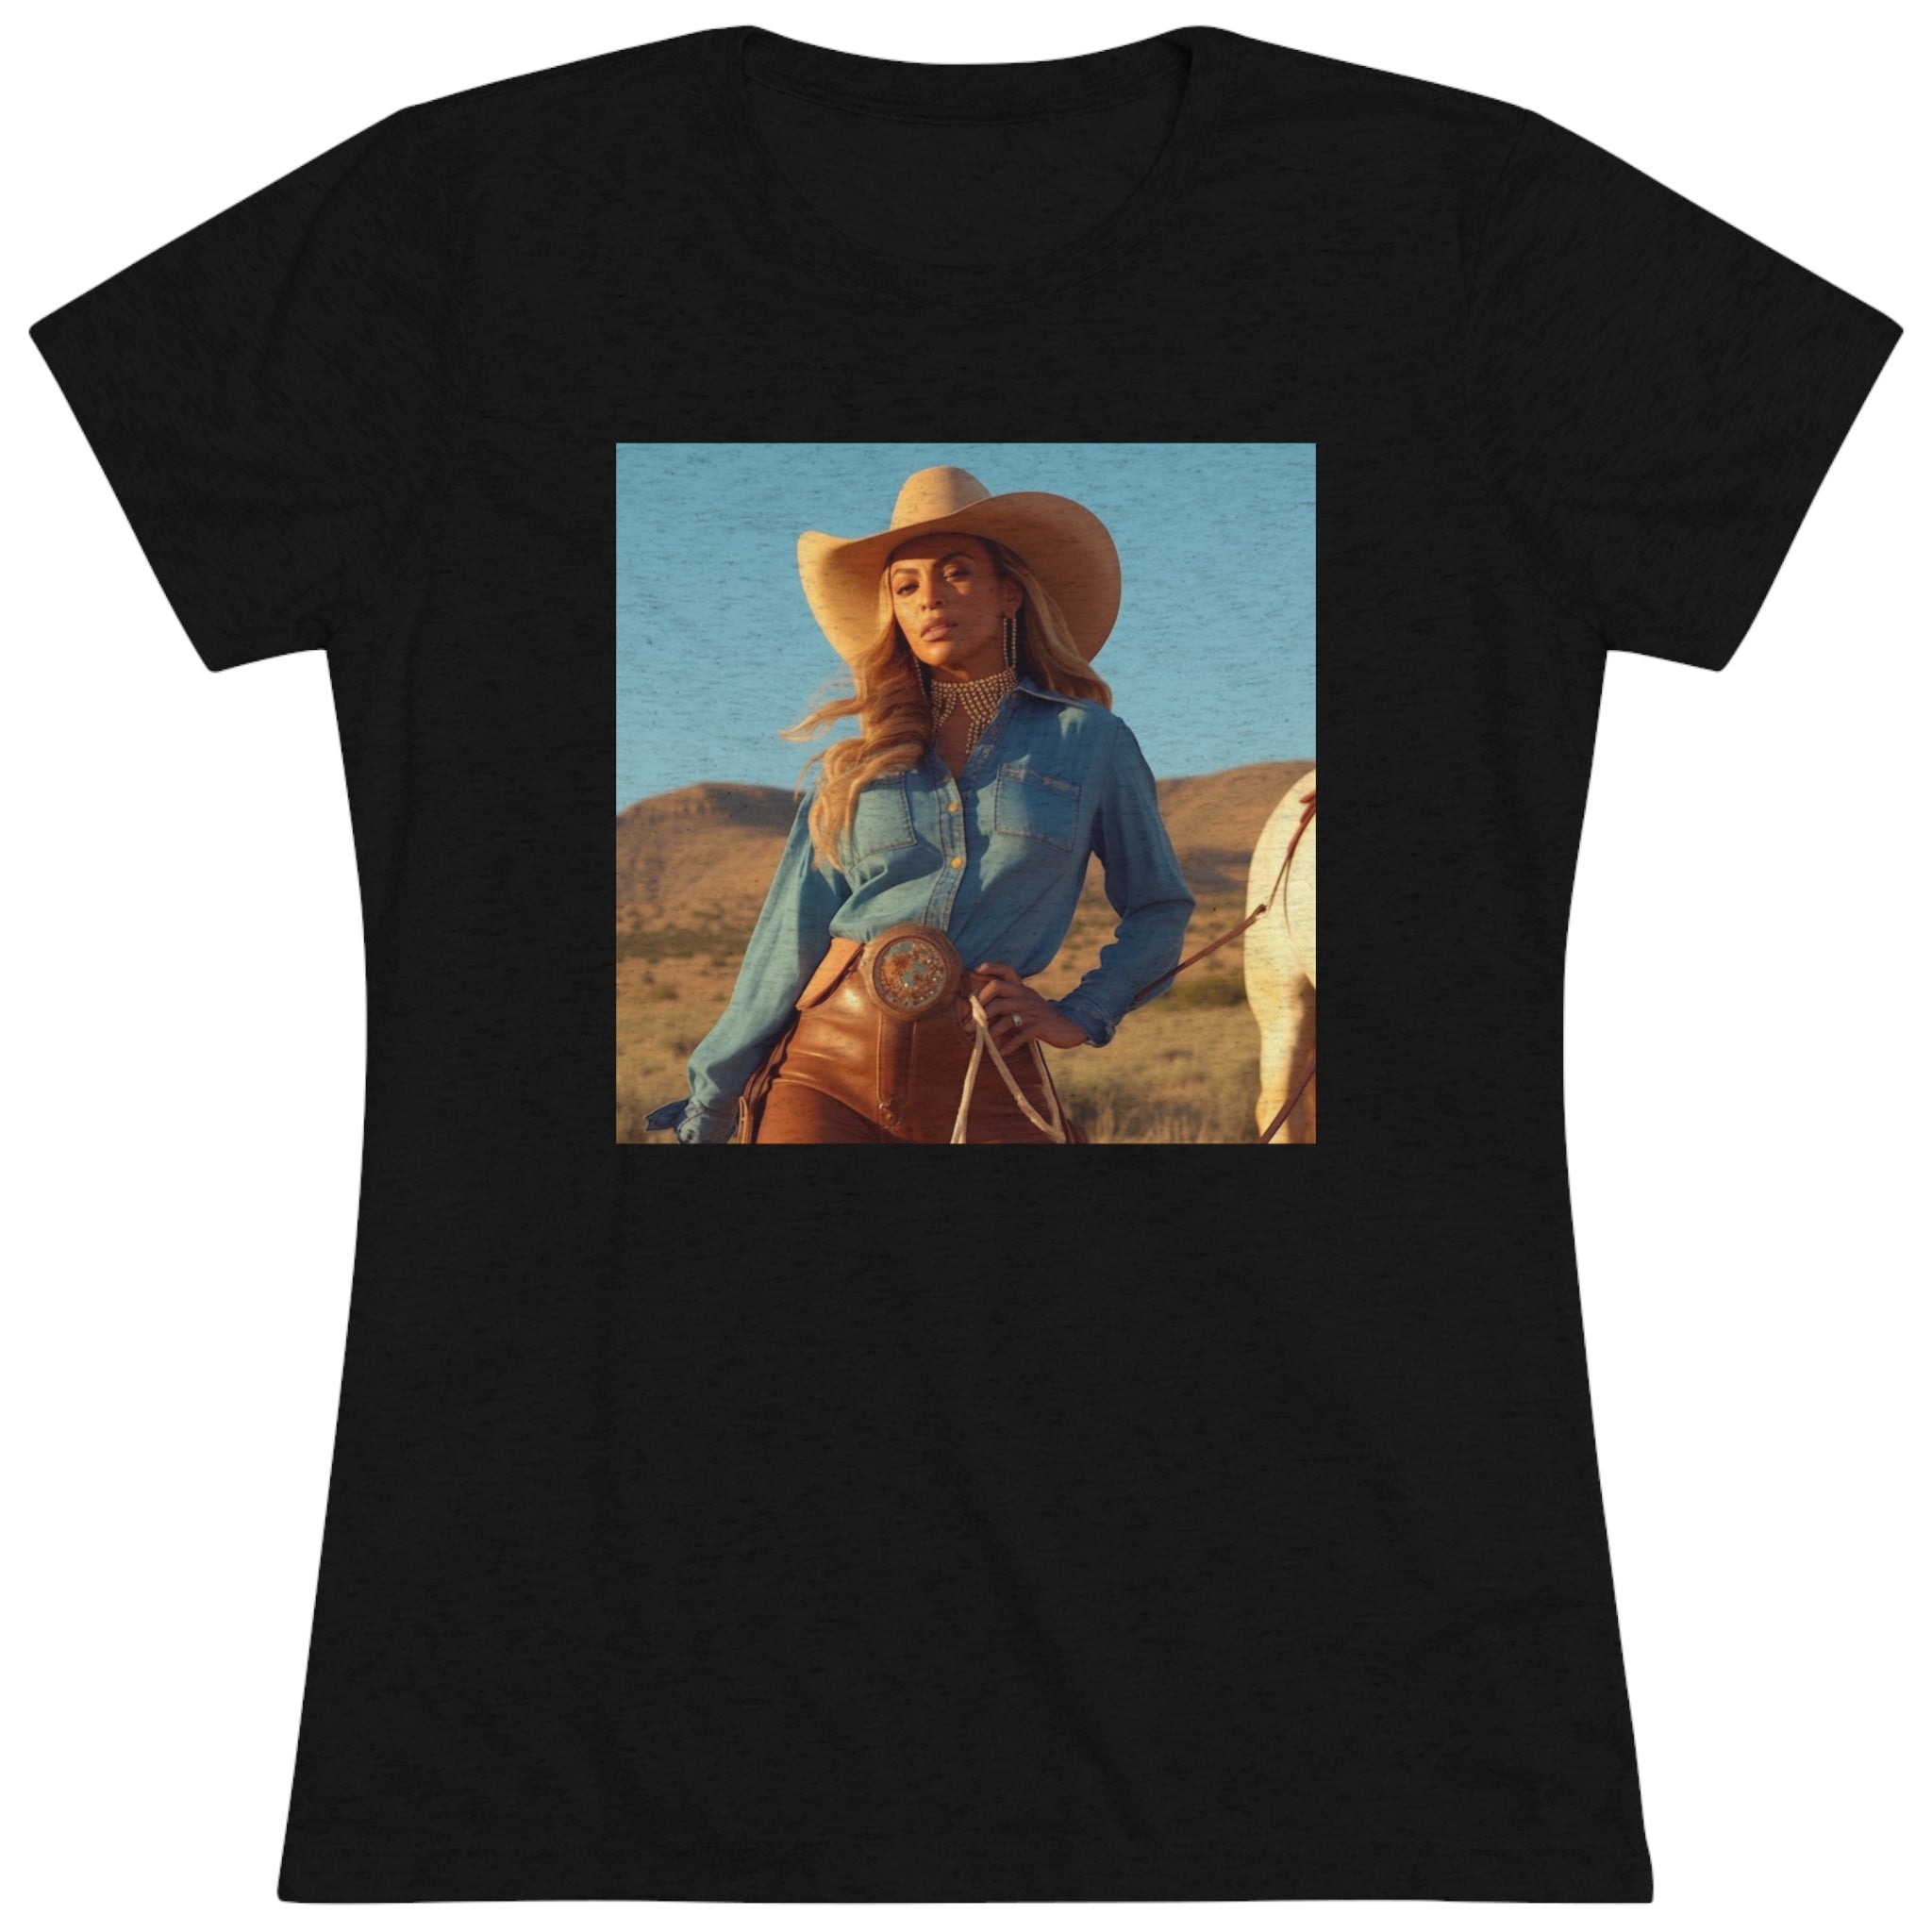 "Rodeo Queen Rhapsody: Bey's Country Charm" Women's Tri-Blend Tee - A Fashionable Homage to Country Music's Beloved Star, Perfect as a Stylish & Comfortable Gift for Her